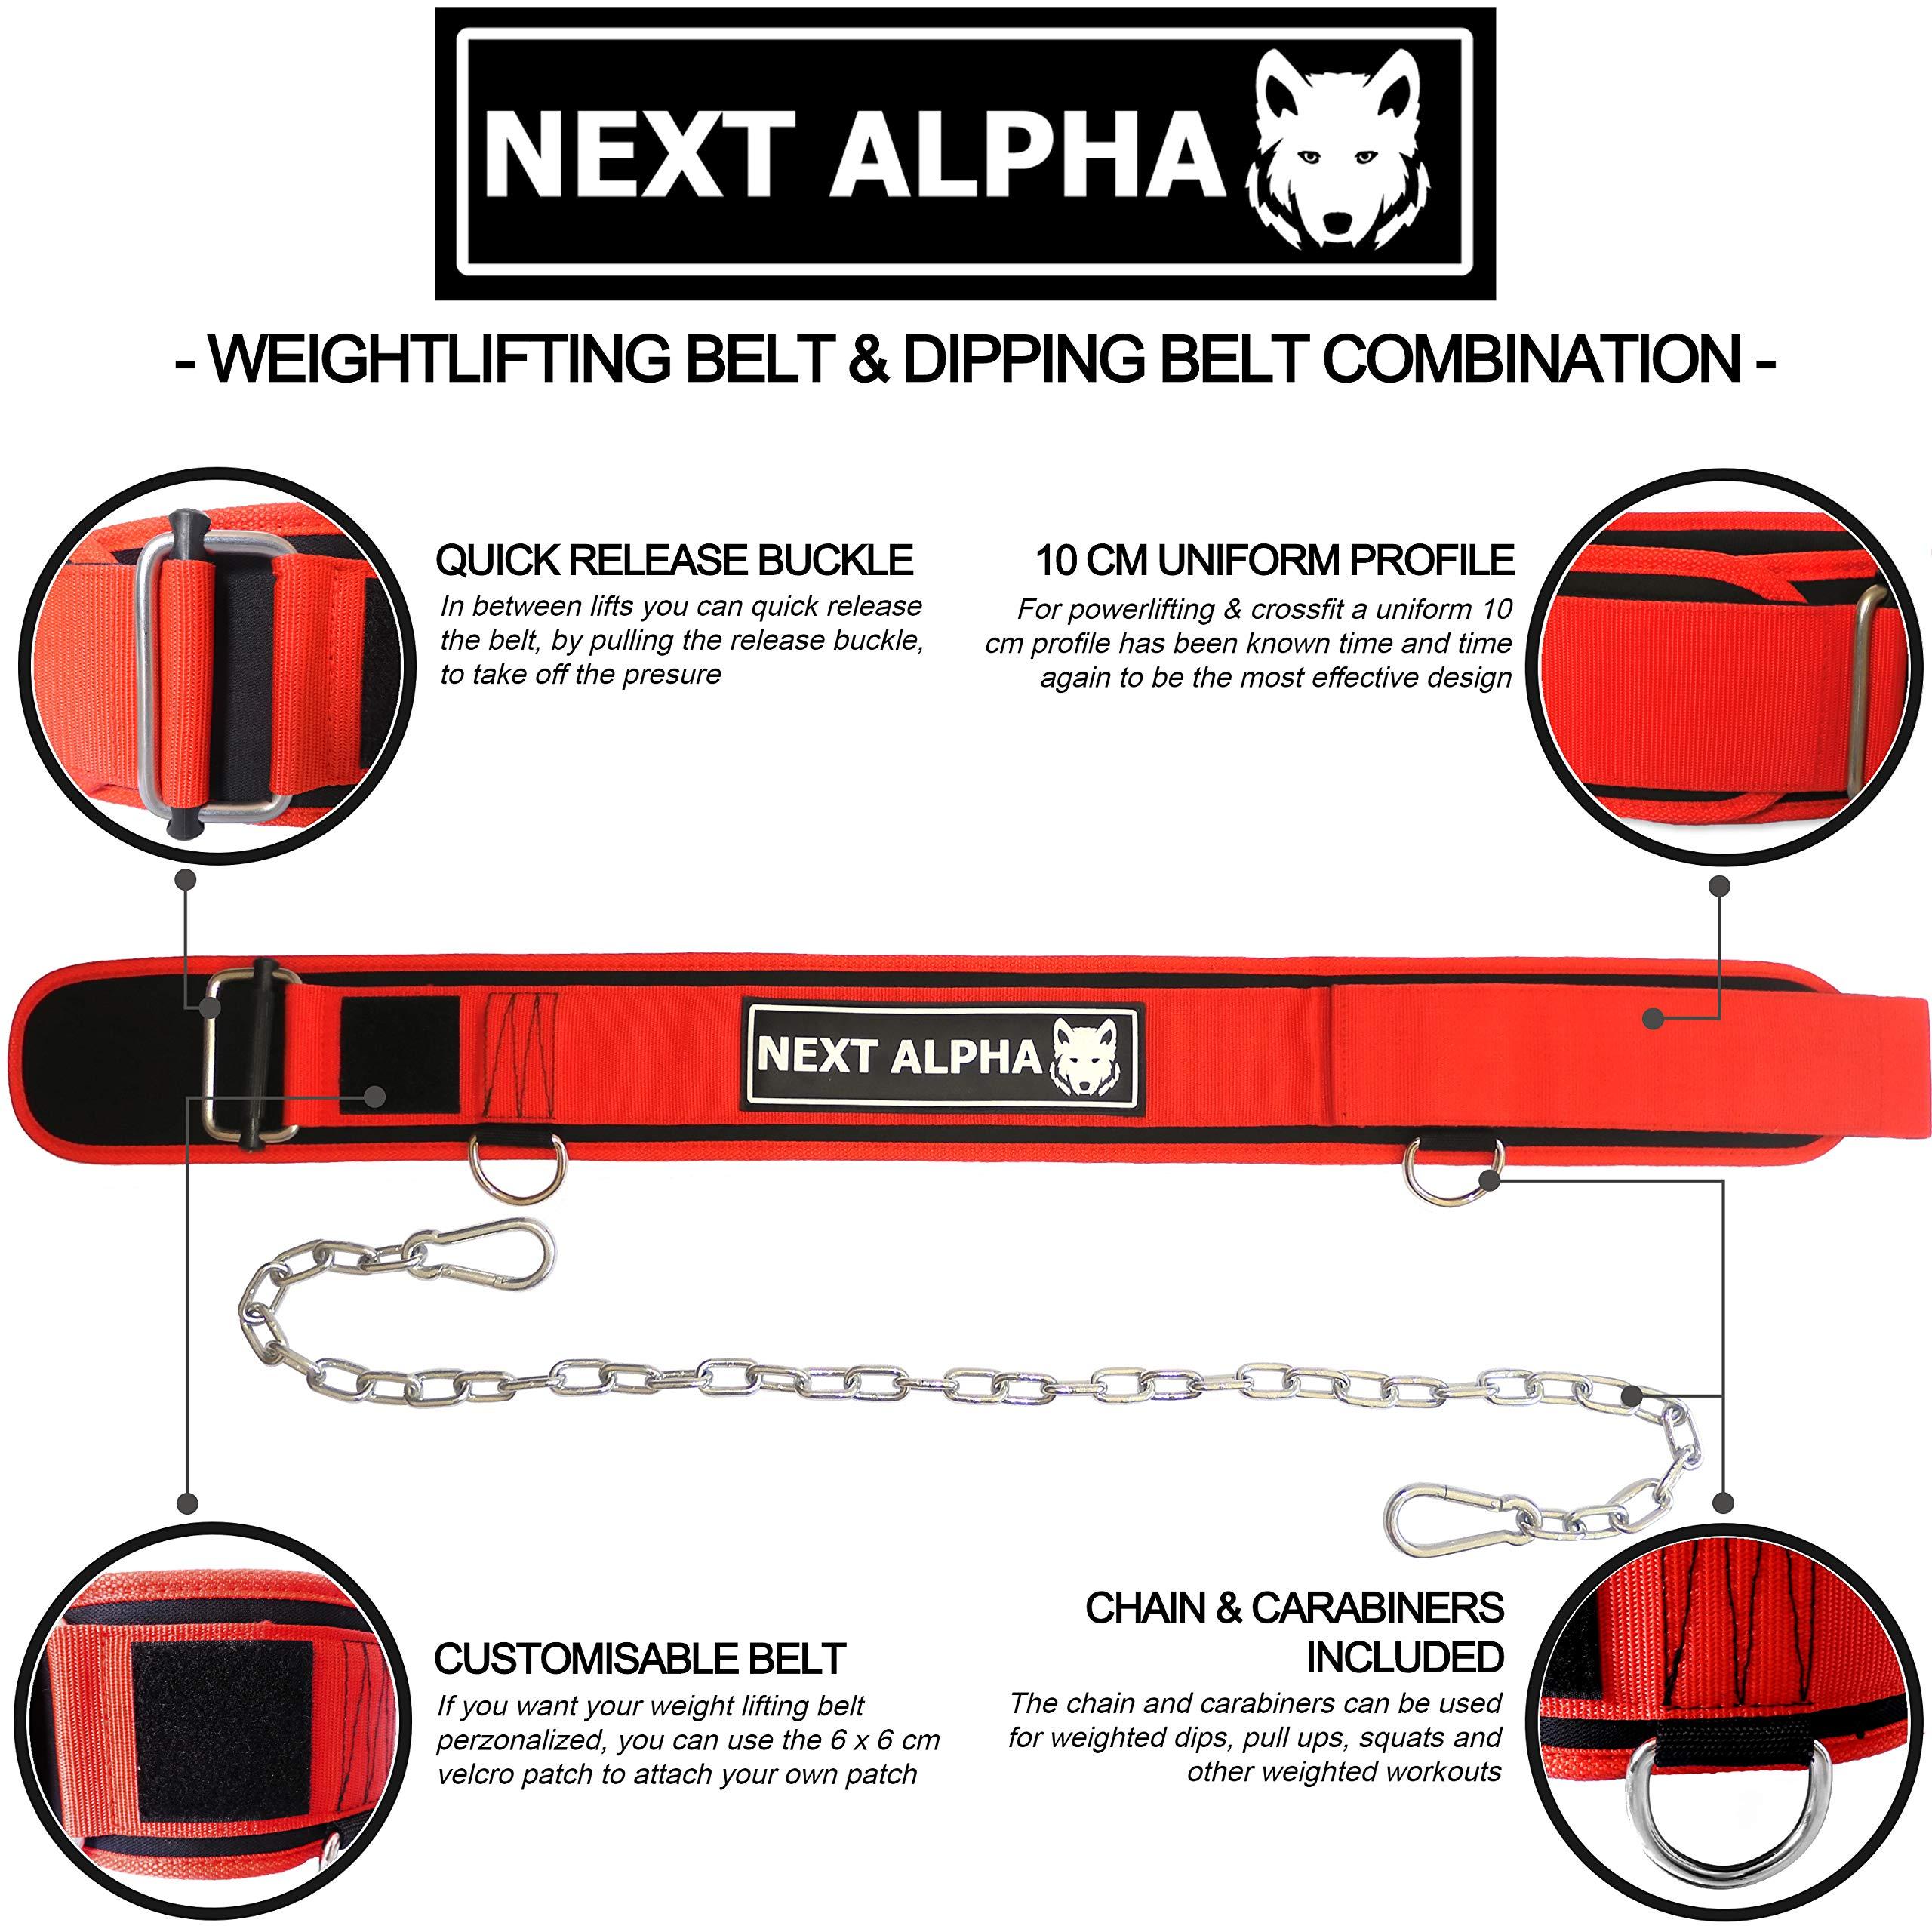 Next Alpha Weightlifting Belt & Dip Belt Combination - Custom Weight Lifting Belt for Men and Women - Self-Locking & Quick Release Buckle - With Chain - Red - Extra Large 1